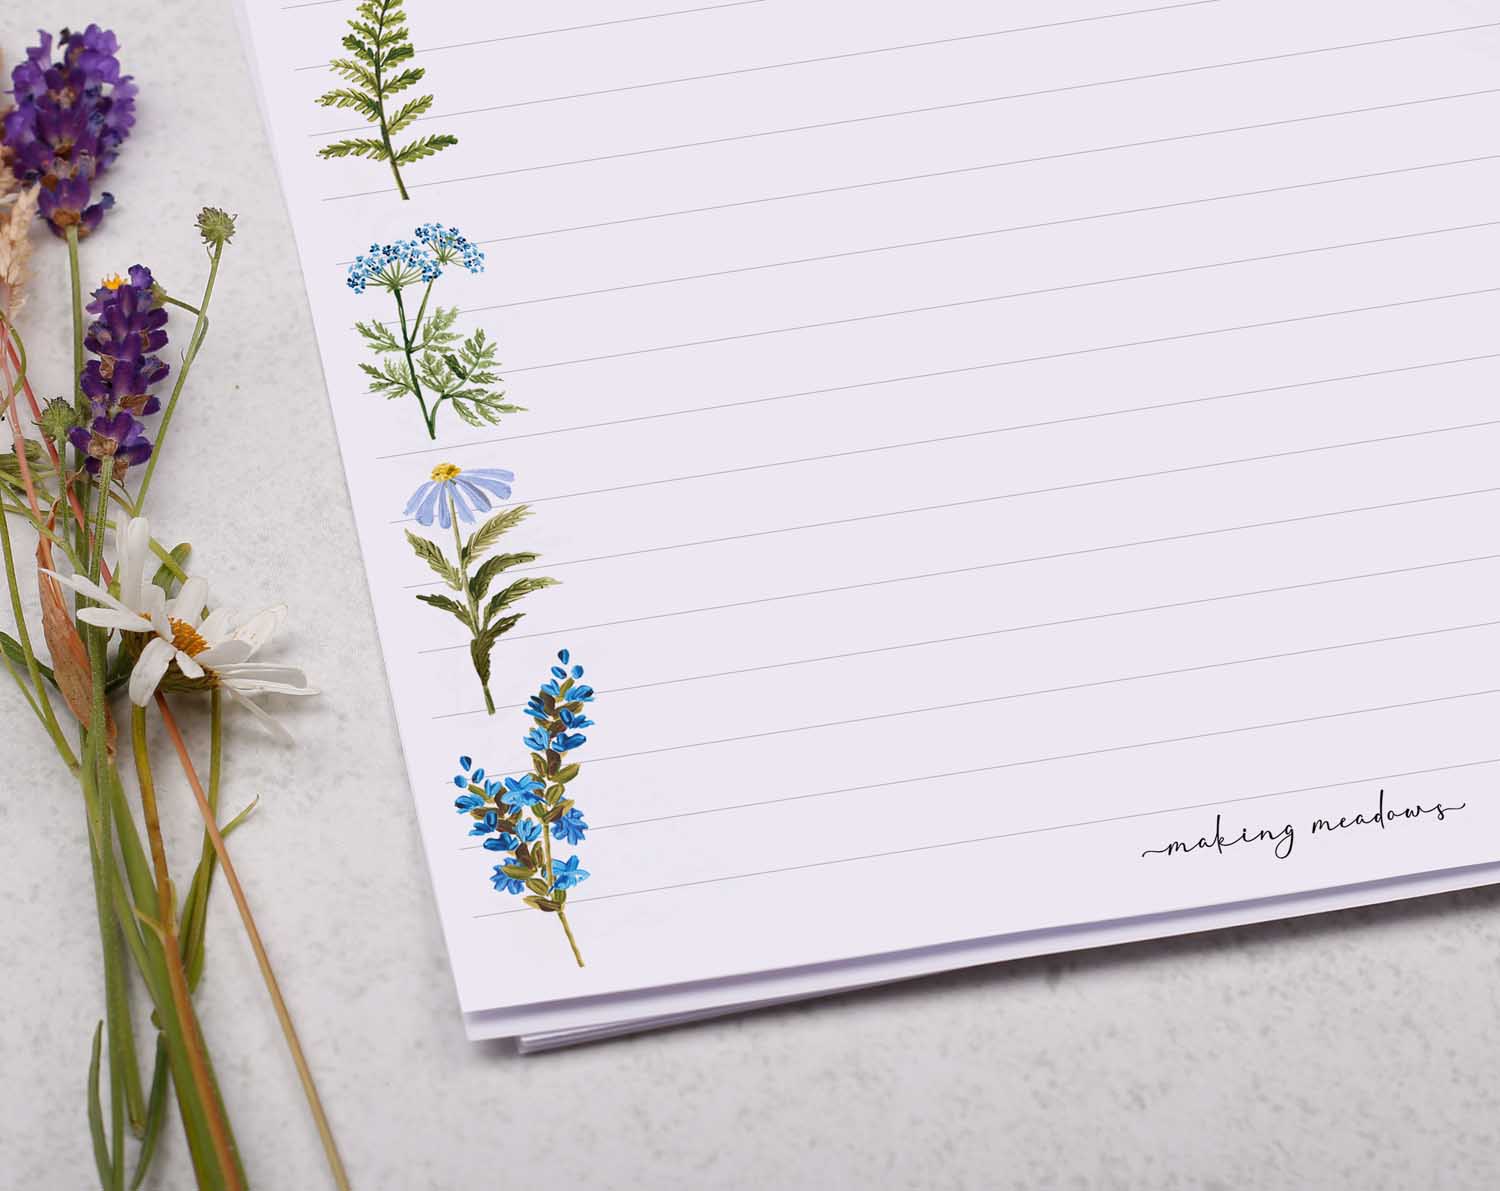 A4 letter writing paper sheets with a blue flower border around the letter paper in a delicate flower pattern.